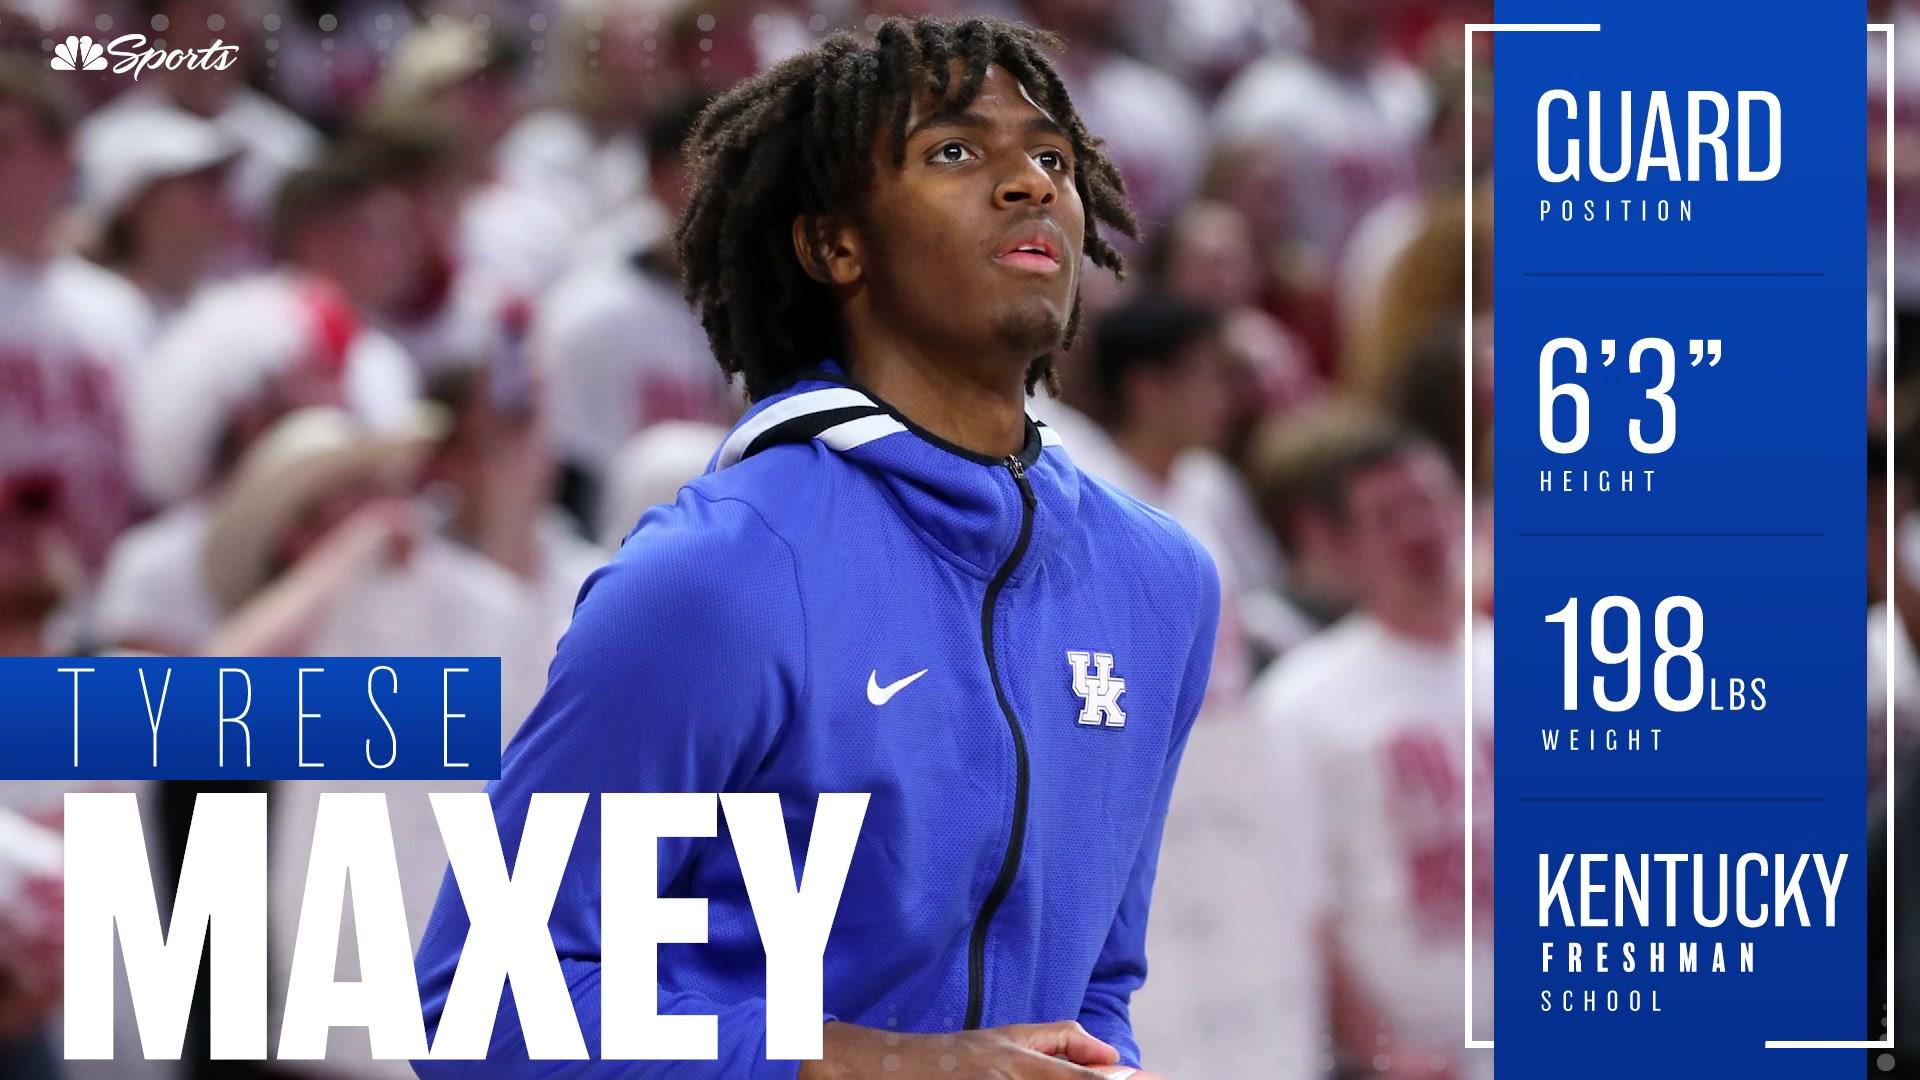 Tyrese Maxey's NBA draft potential was on full display for Kentucky 